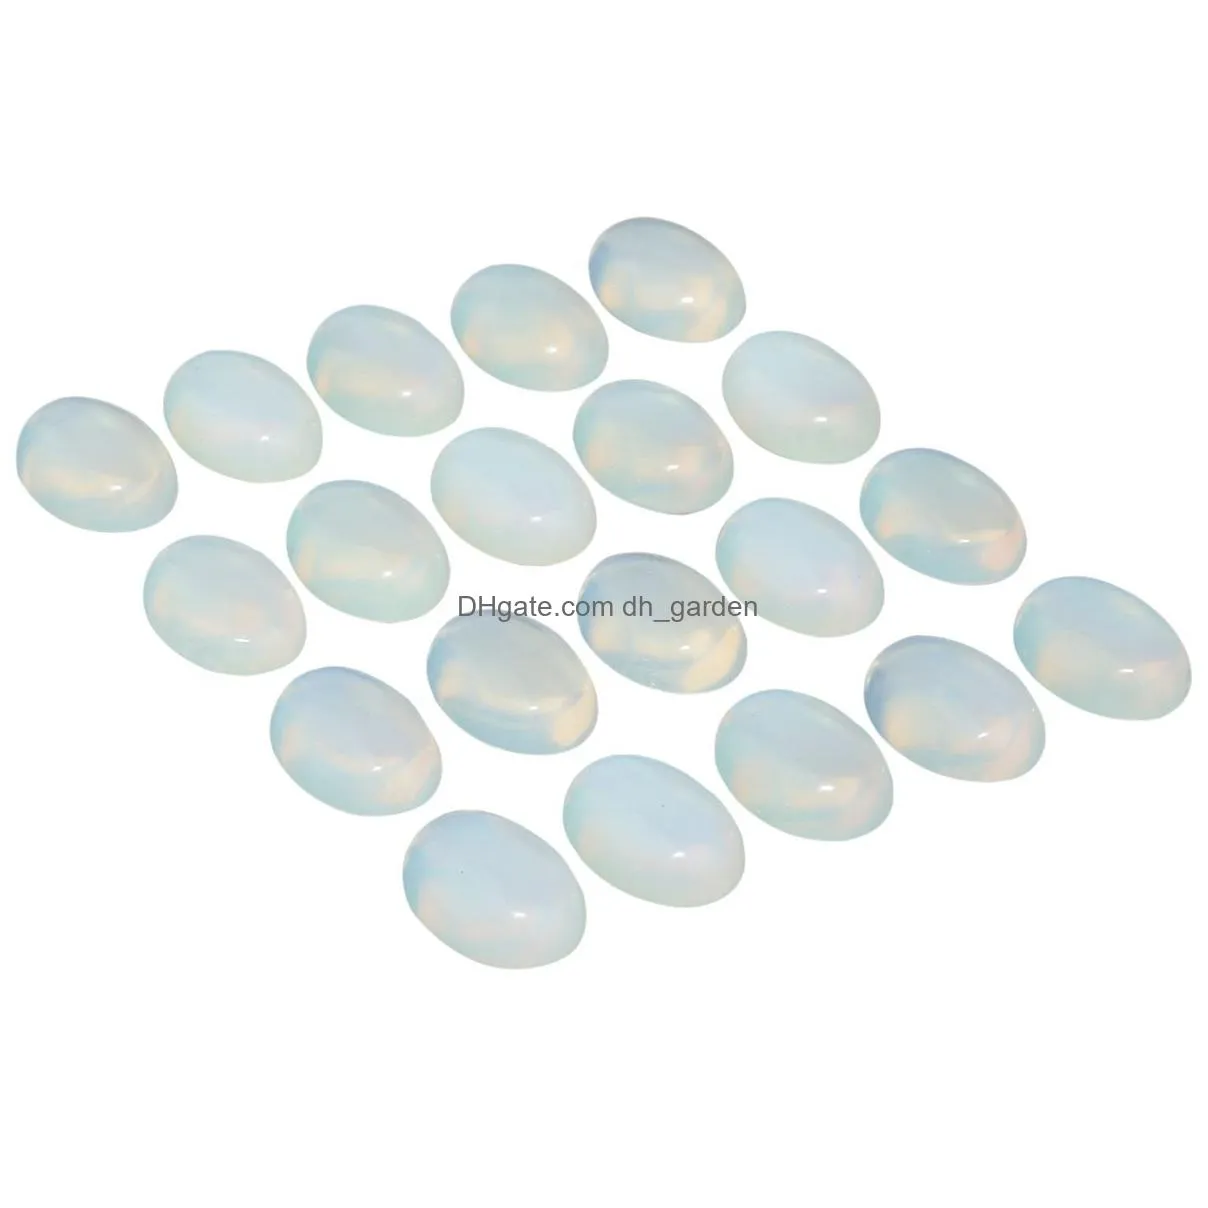 opalite oval flat back gemstone cabochons healing chakra crystal stone opal bead cab covers no hole for jewelry craft making